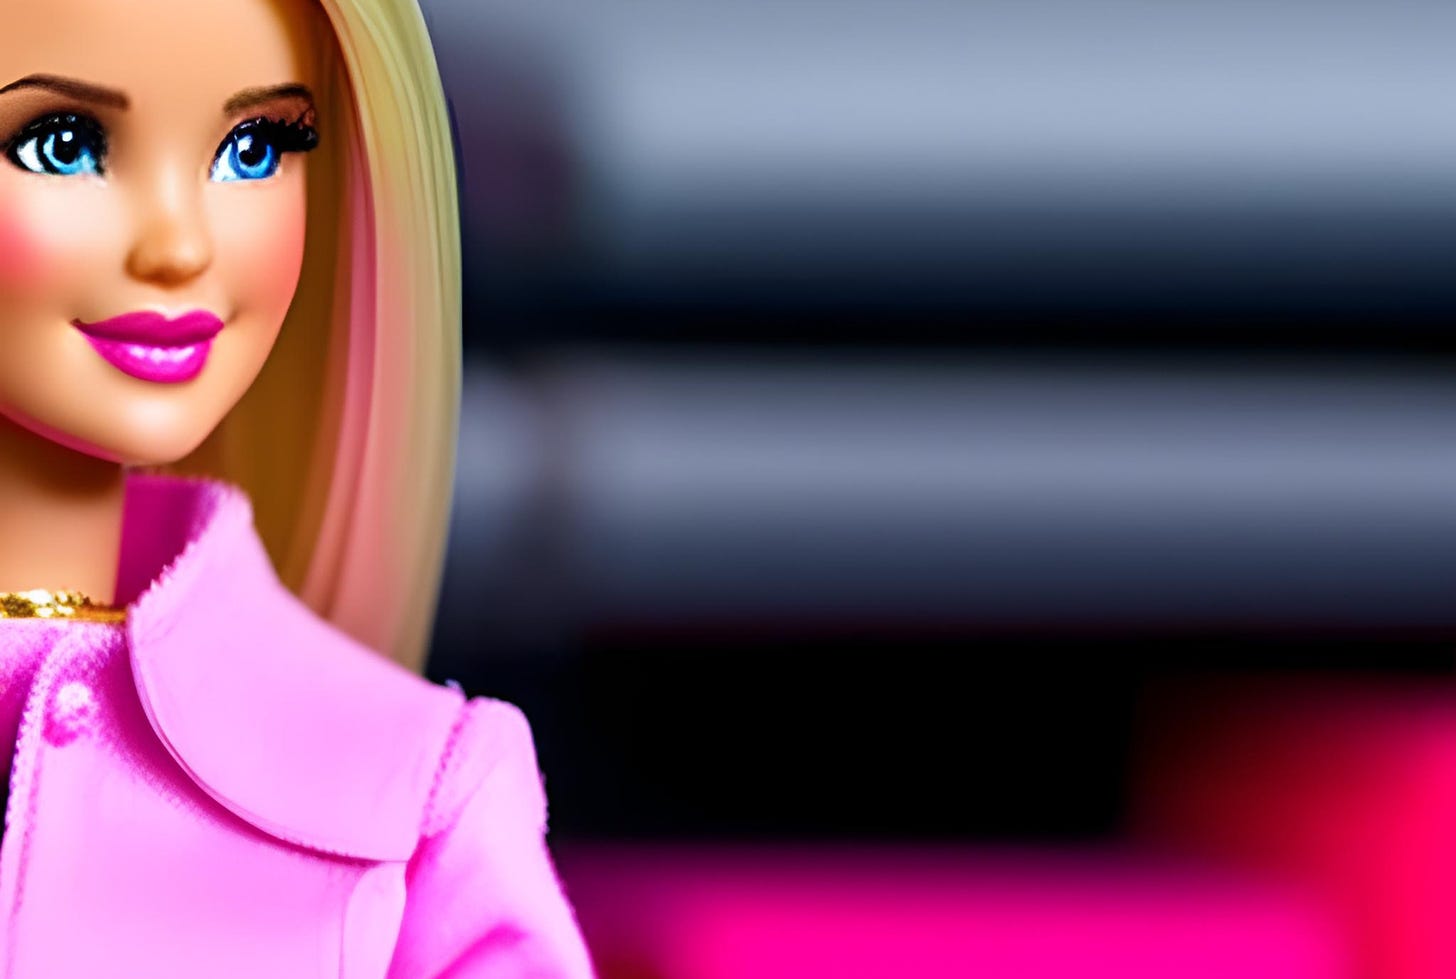 AI-generated image of a Barbie doll in a suit looking to the right